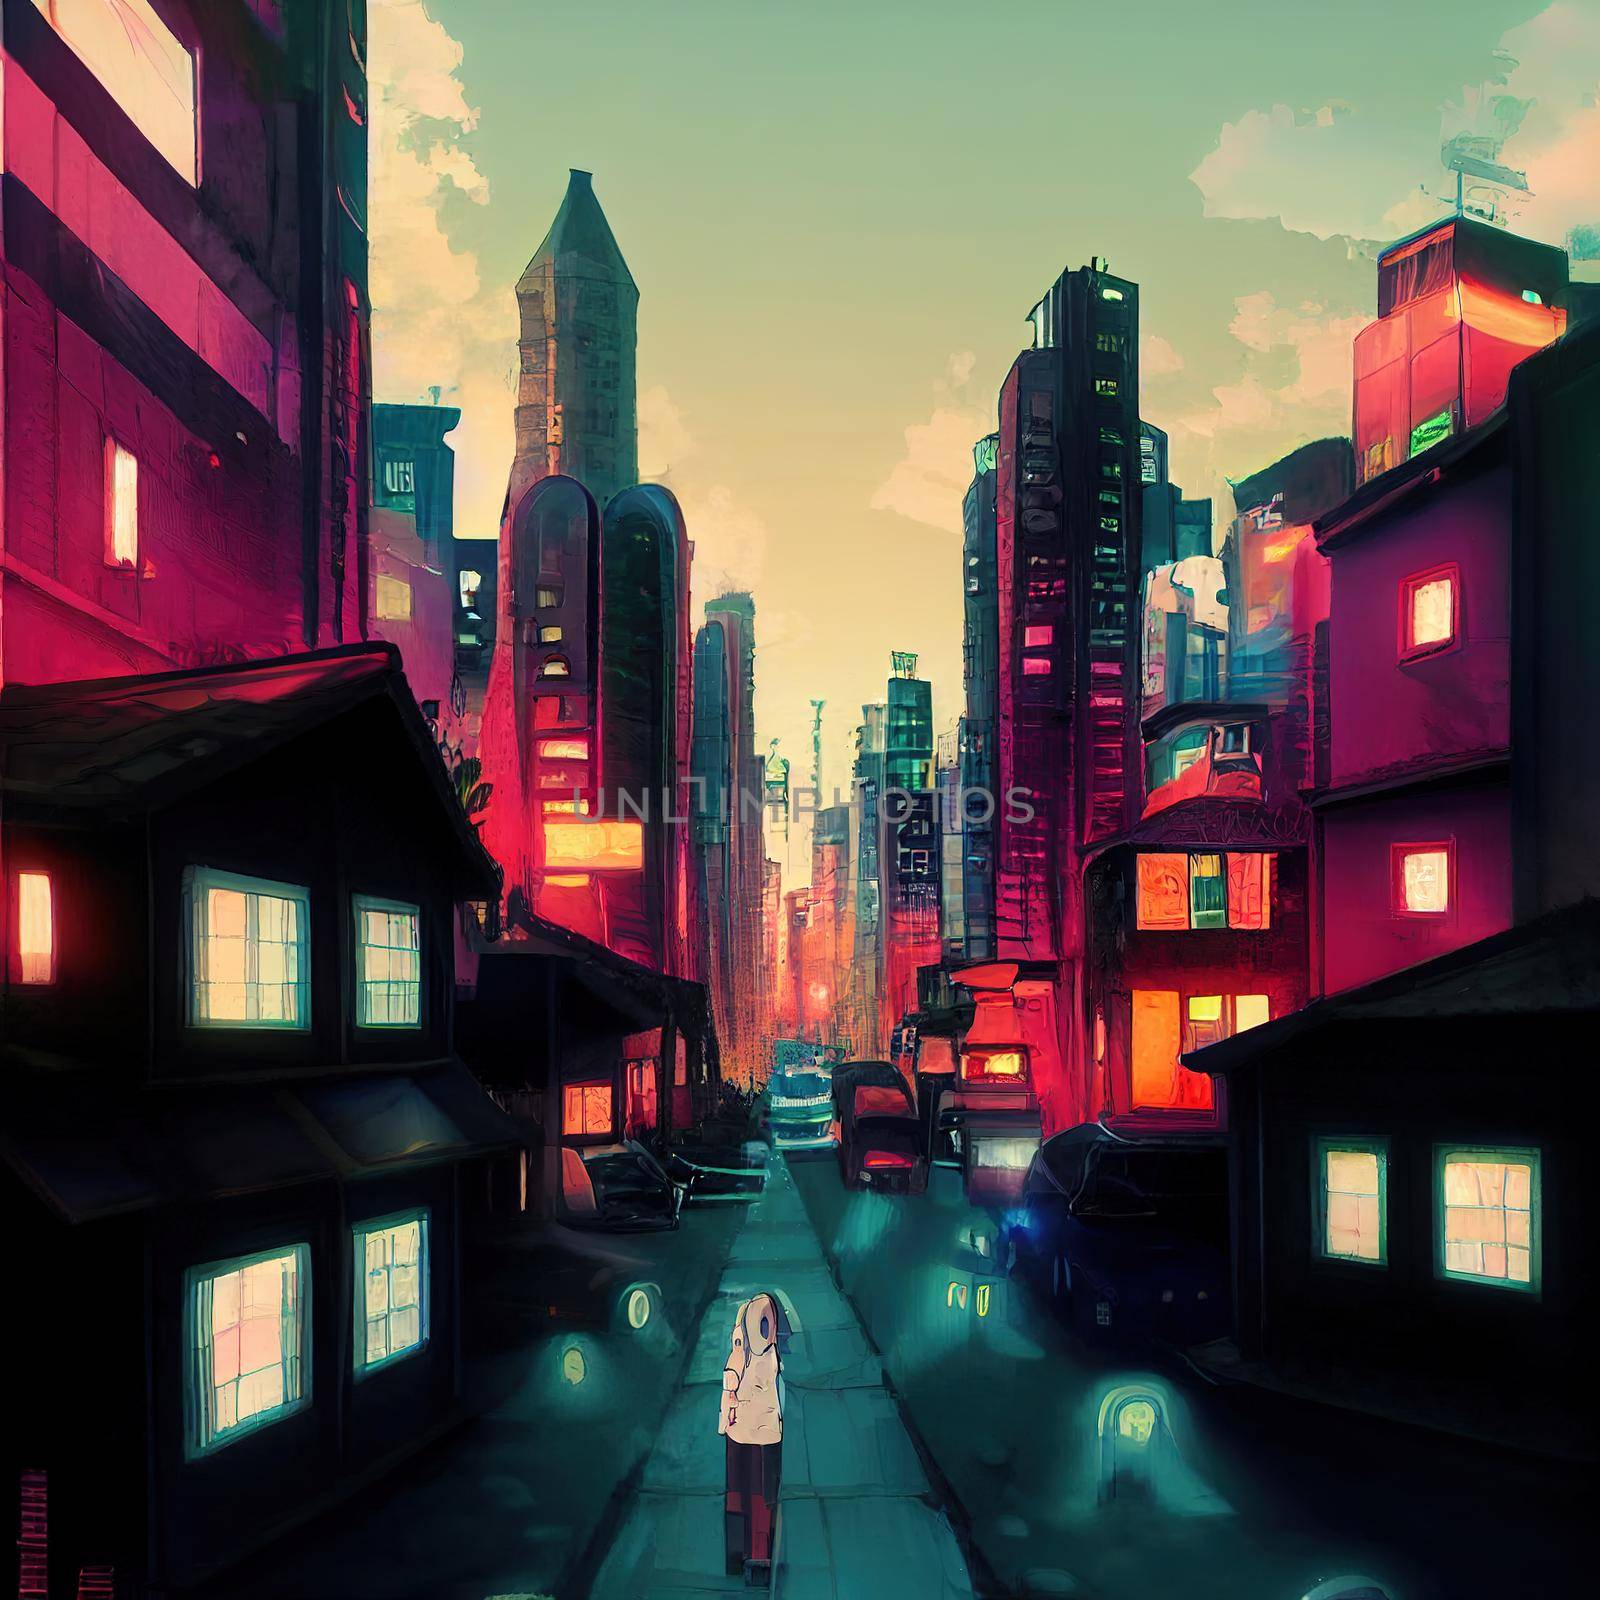 anime style drawing of street. High quality 3d illustration